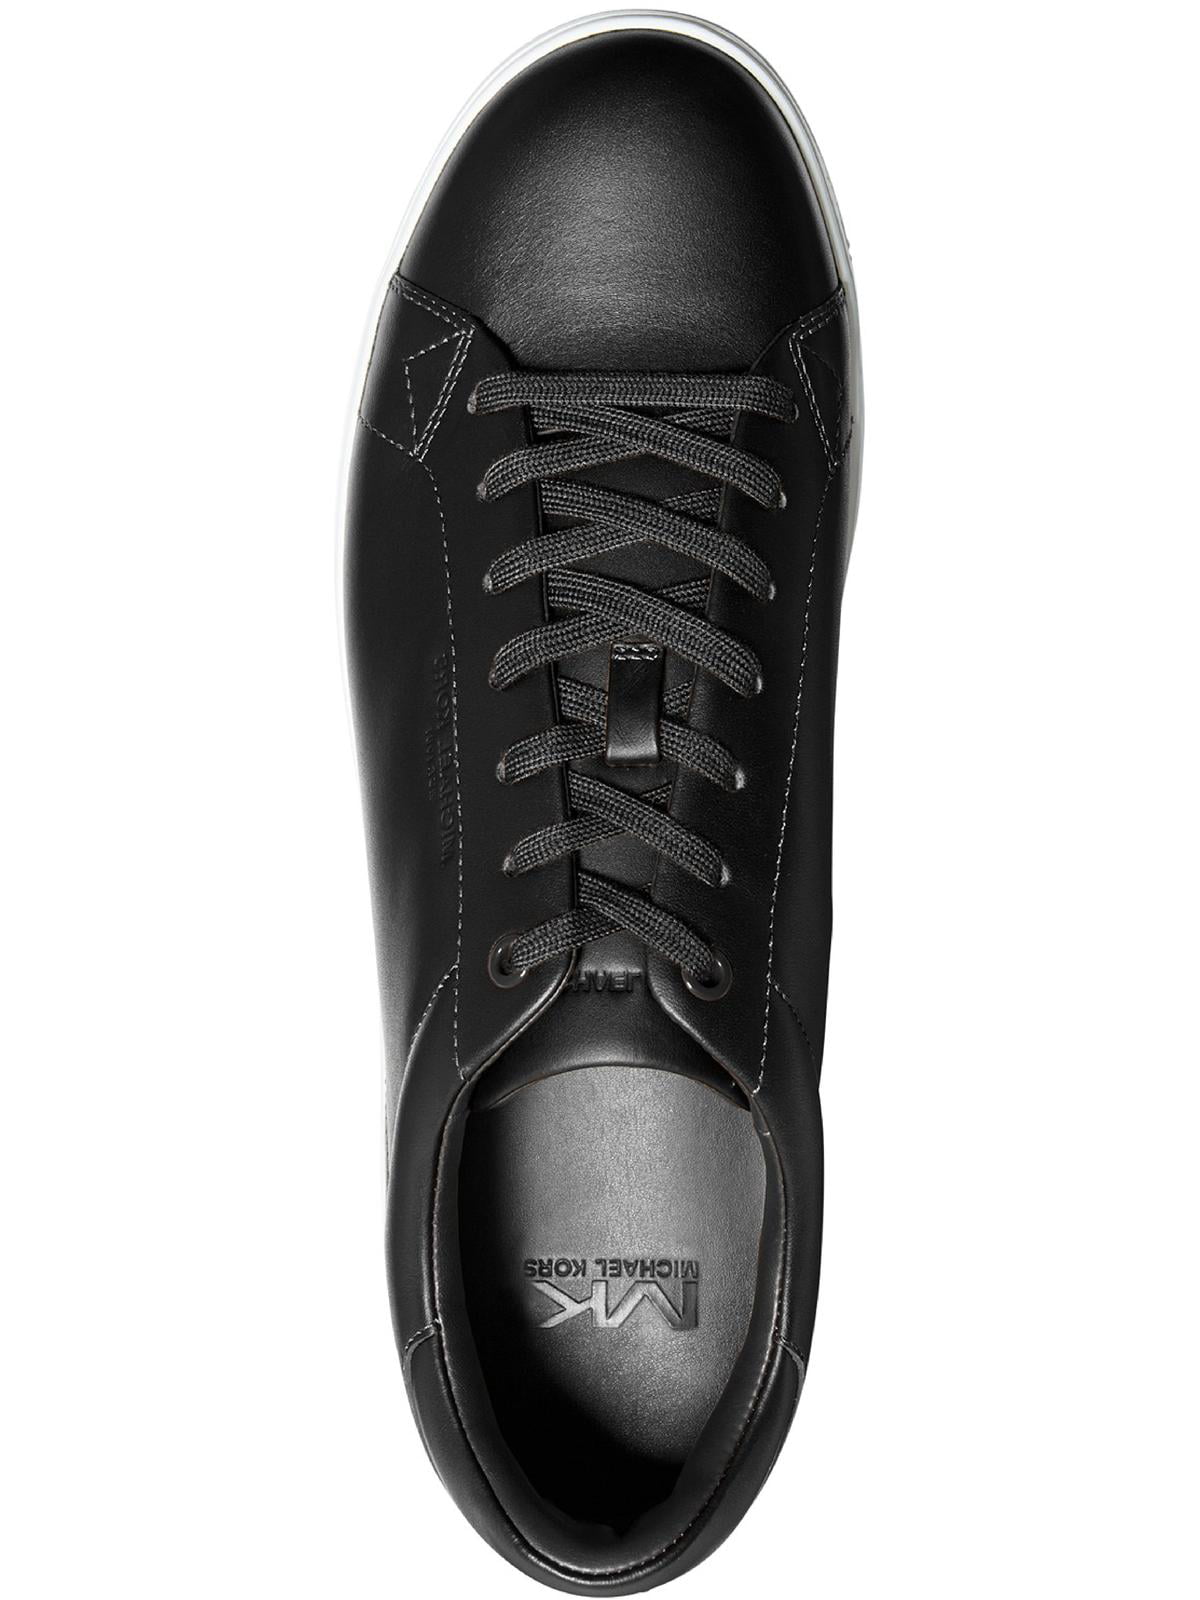 Kruiden opslaan hoek Michael Kors Nate Men's Smooth Leather Lace-Up Low Top Fashion Sneakers -  Walmart.com